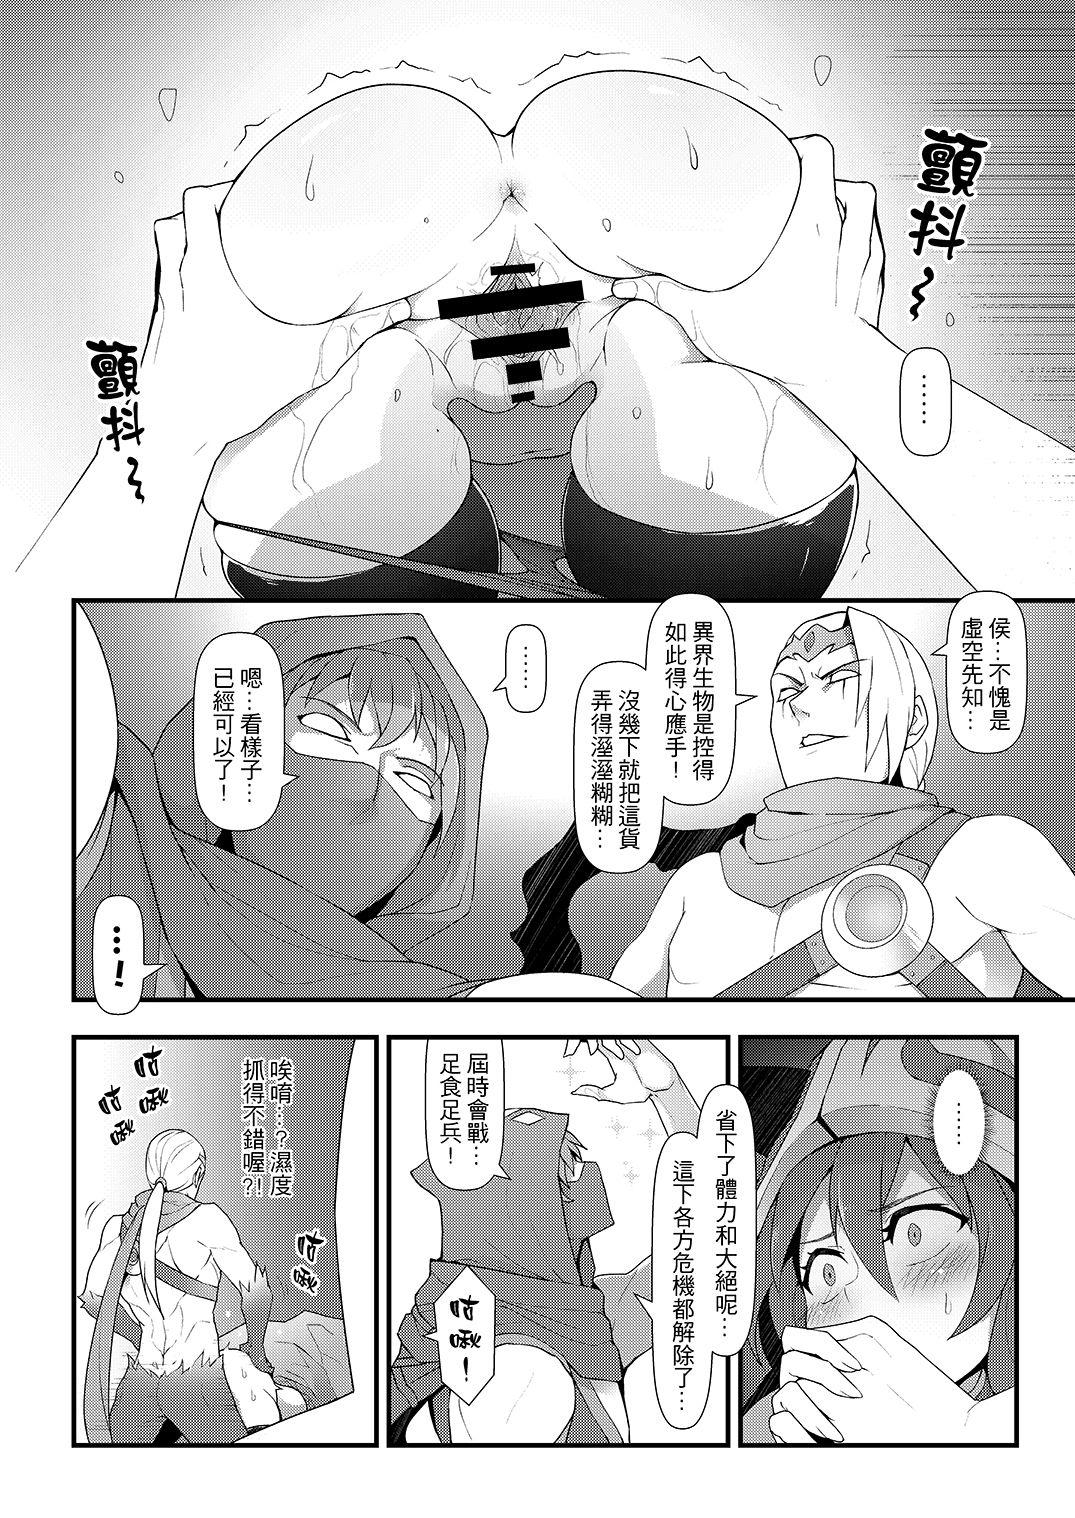 Cousin ININ Renmei 2 - League of legends Gay Massage - Page 11